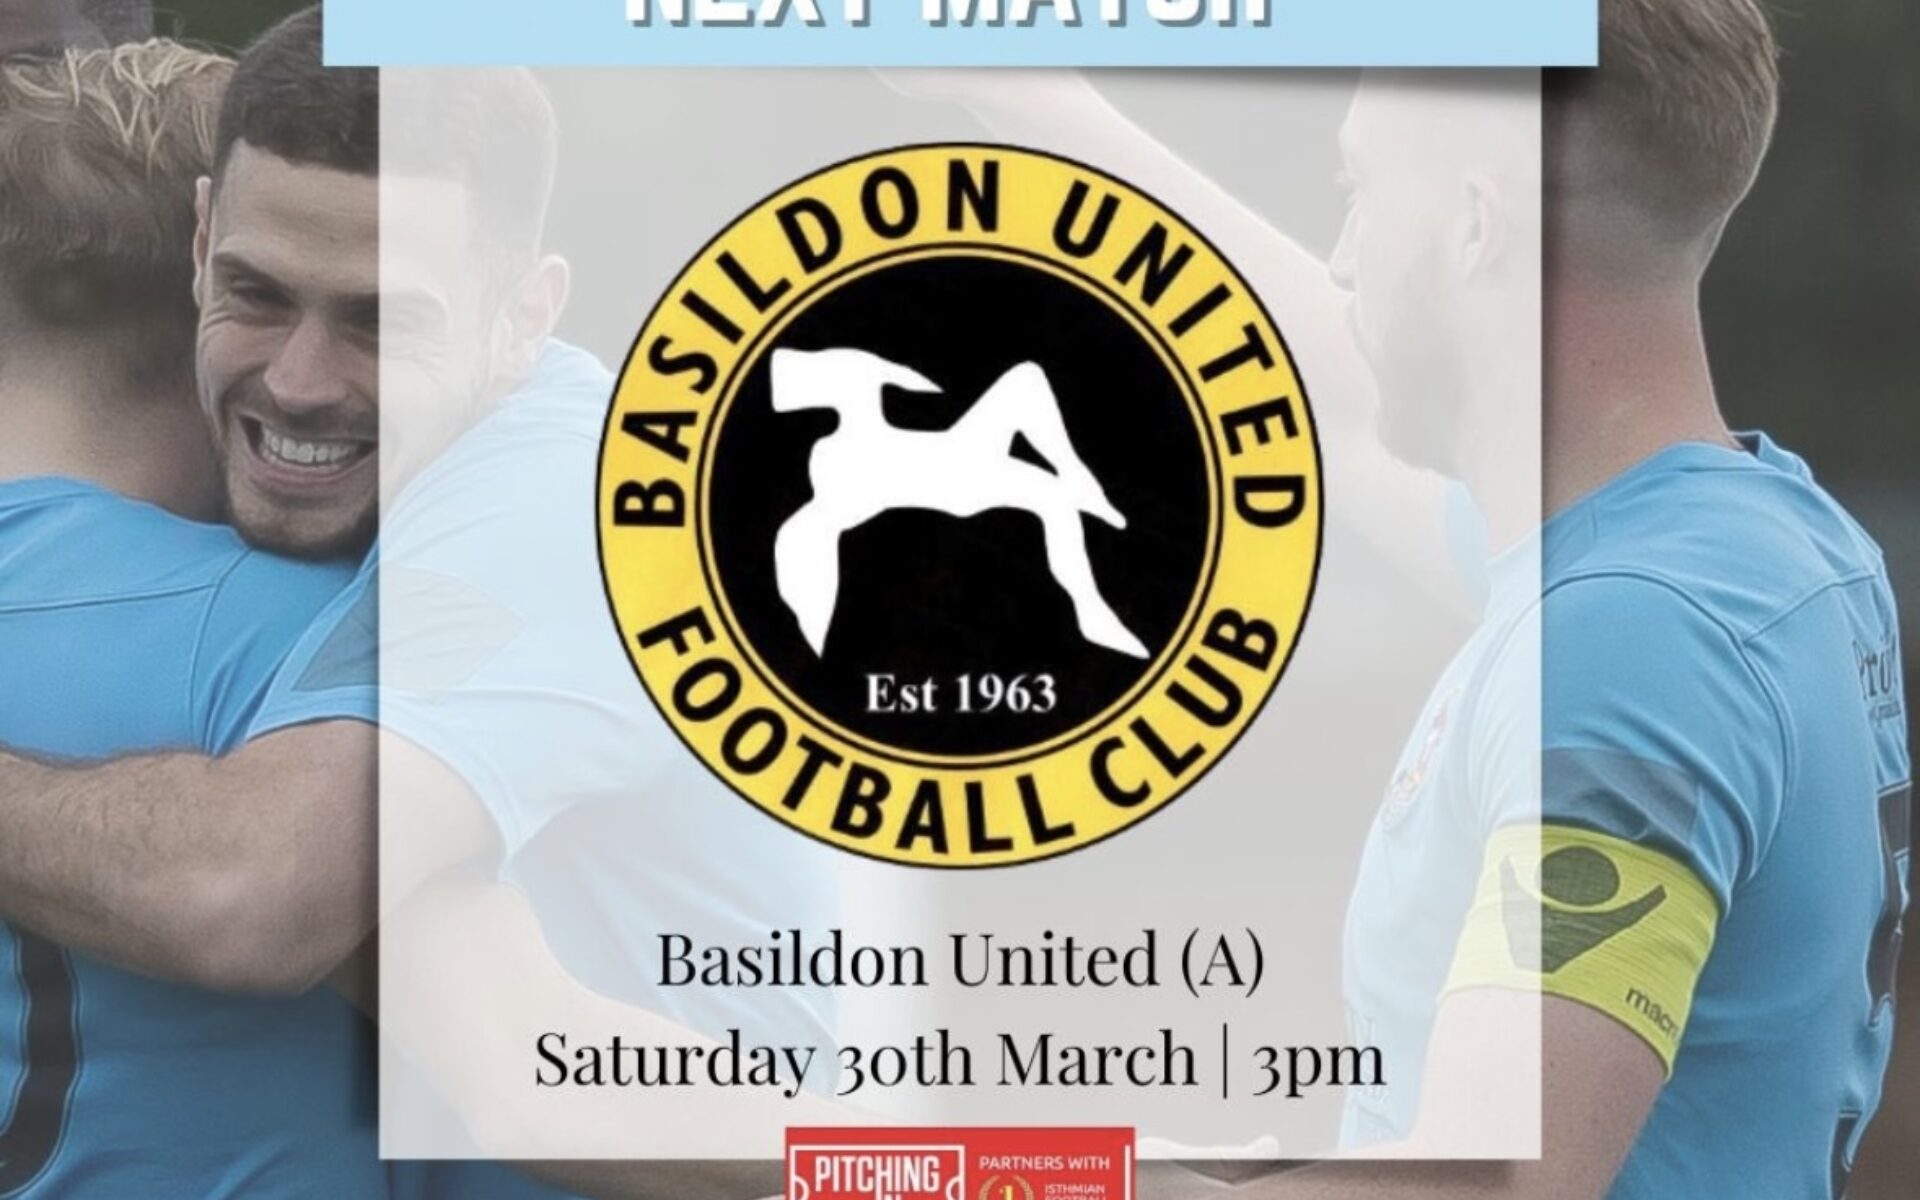 Basildon United v Brentwood Town - Match Postponed Featured Image